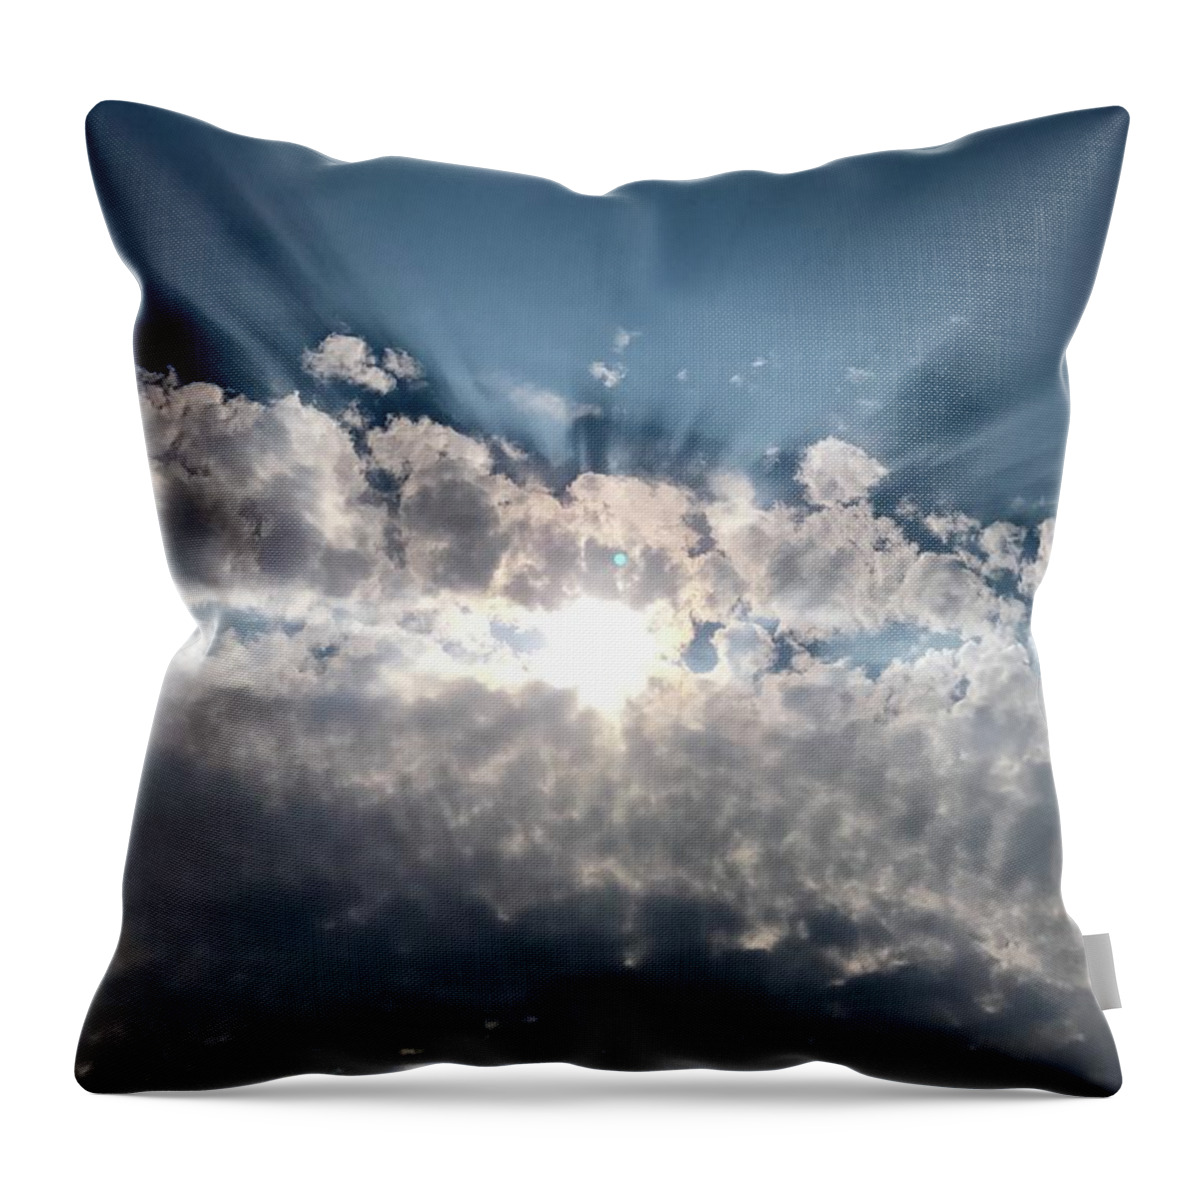 Clouds Throw Pillow featuring the photograph Clouds by Alex King